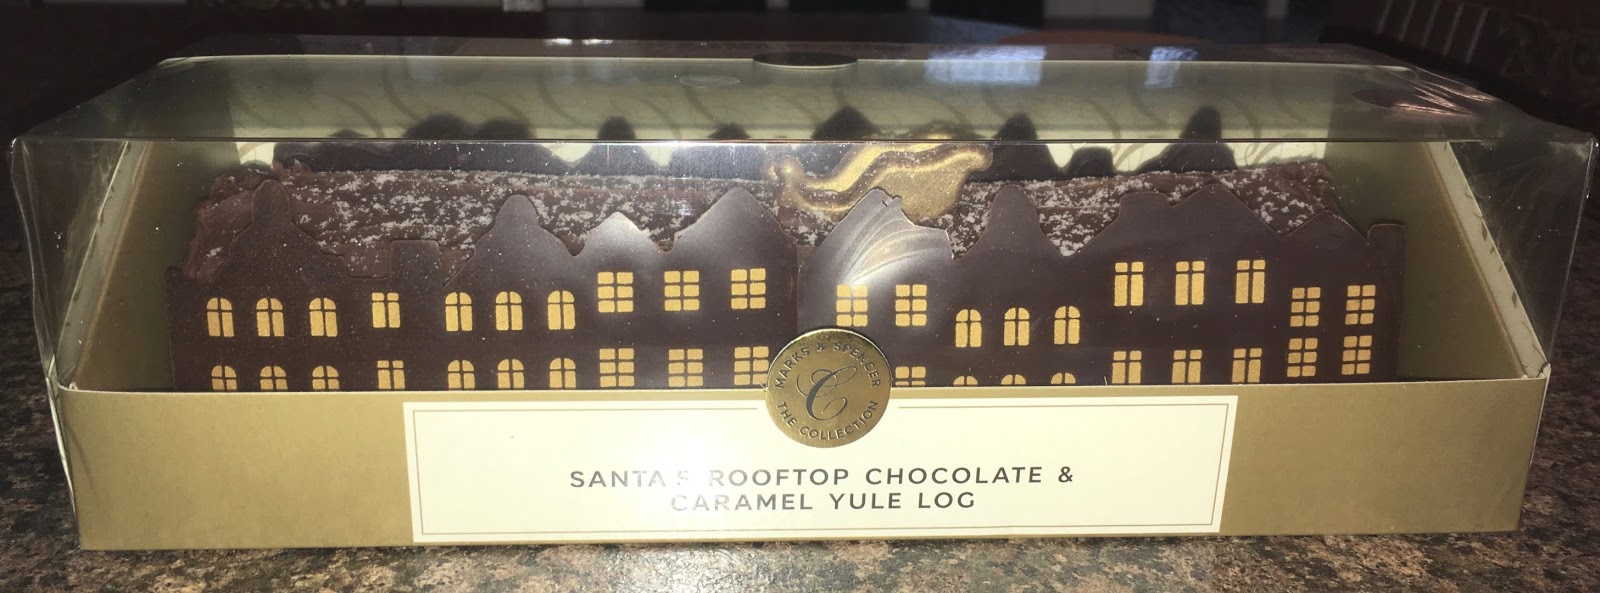 FOODSTUFF FINDS: Santa’s Rooftop Chocolate and Caramel Yule Log (Marks & Spencer) By @Cinabar